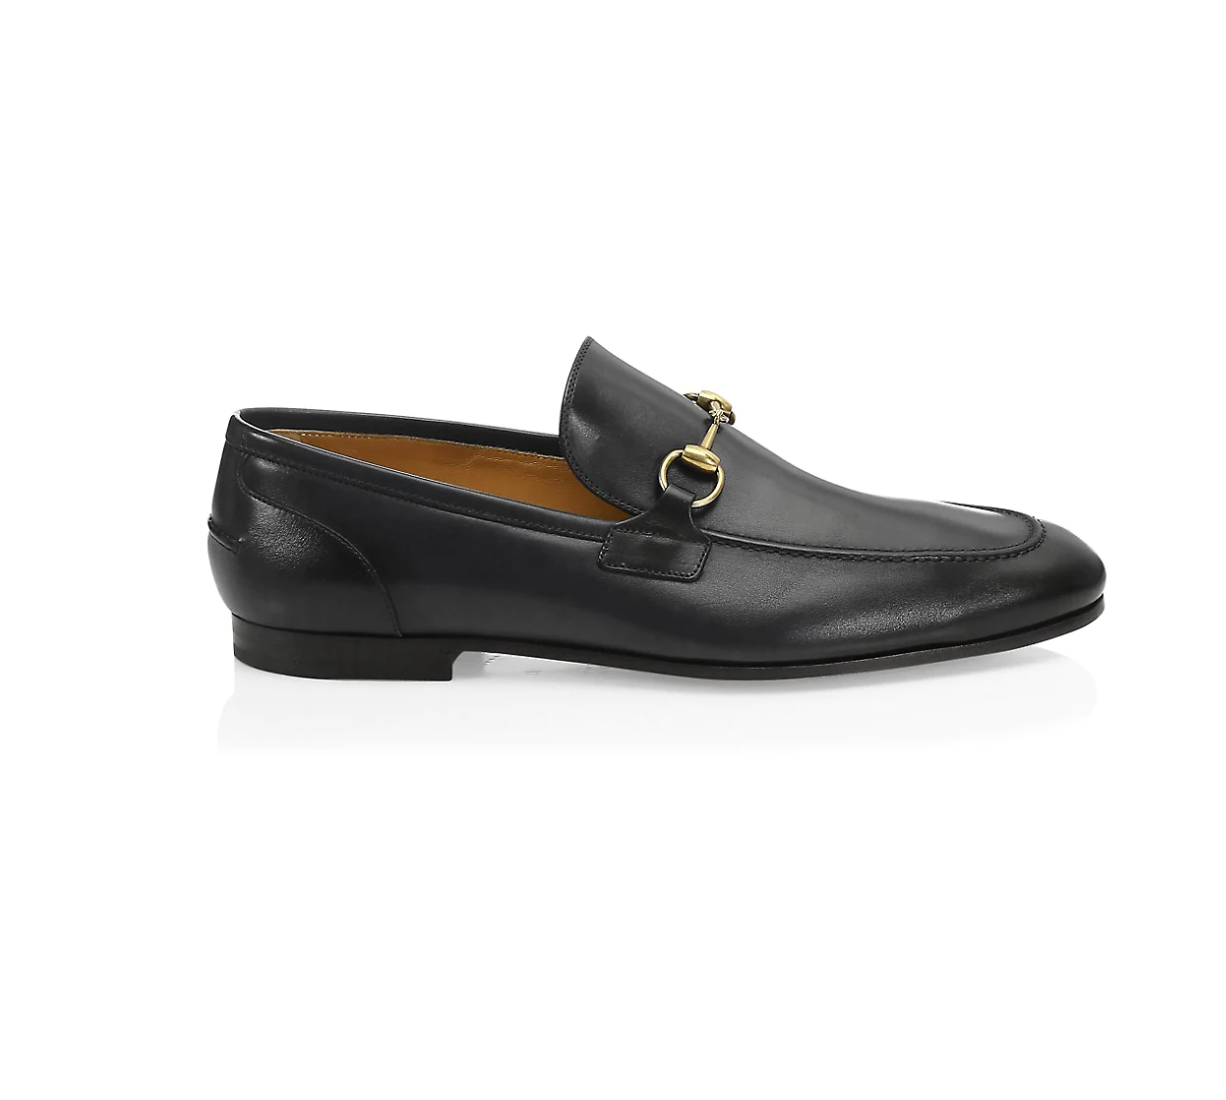 10-timeless-fashion-items-we-all-should-invest-in-gucci-jordaan-leather-loafer